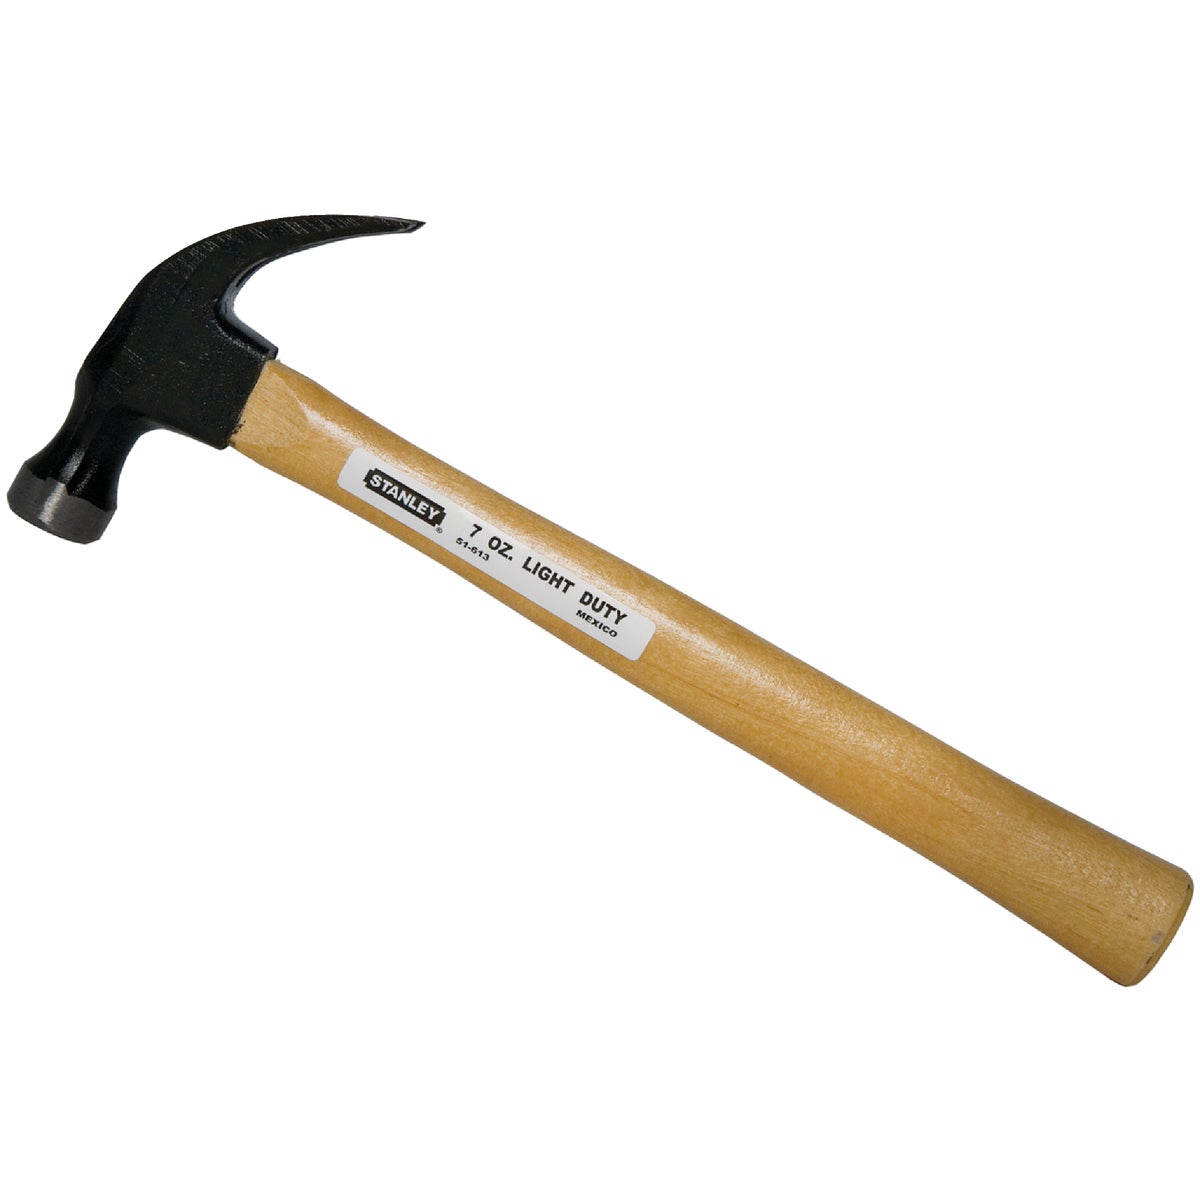 Stanley 7 Oz. Smooth-Face Curved Claw Hammer with Hickory Handle